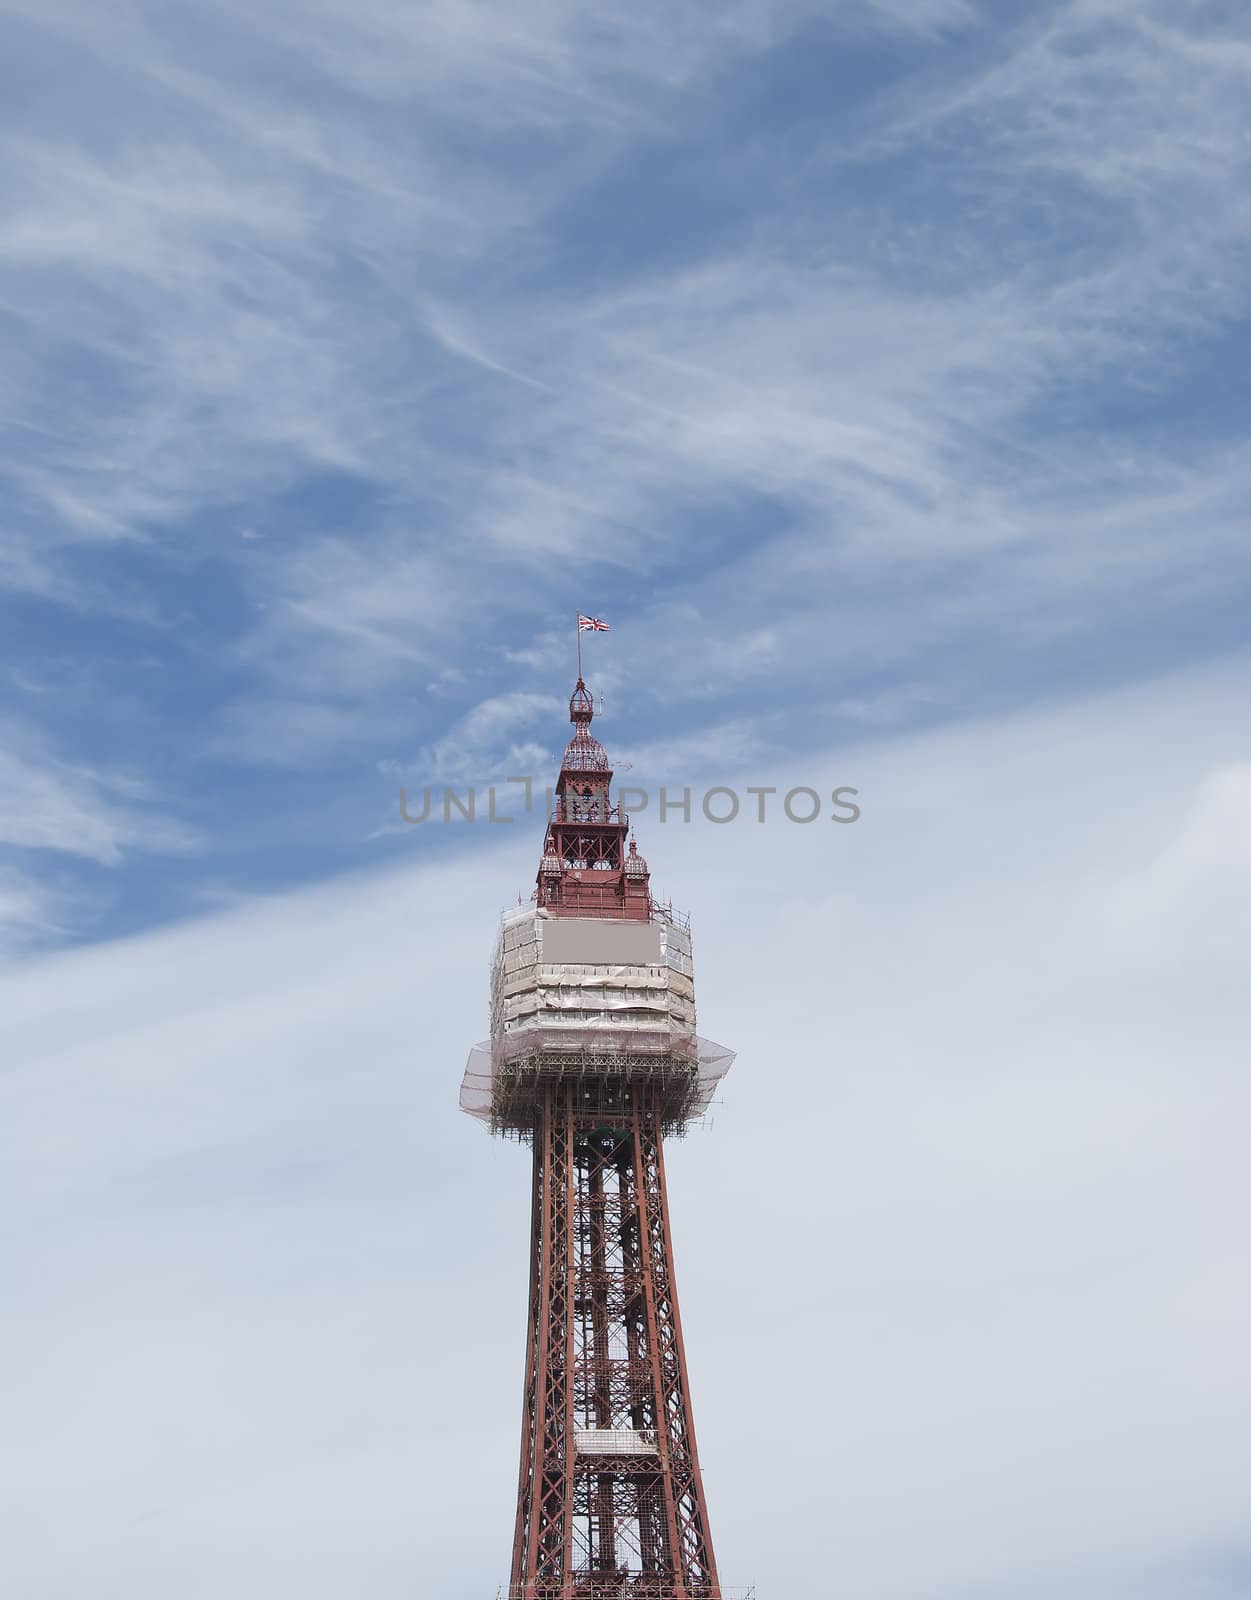 Blackpool Tower6 by d40xboy